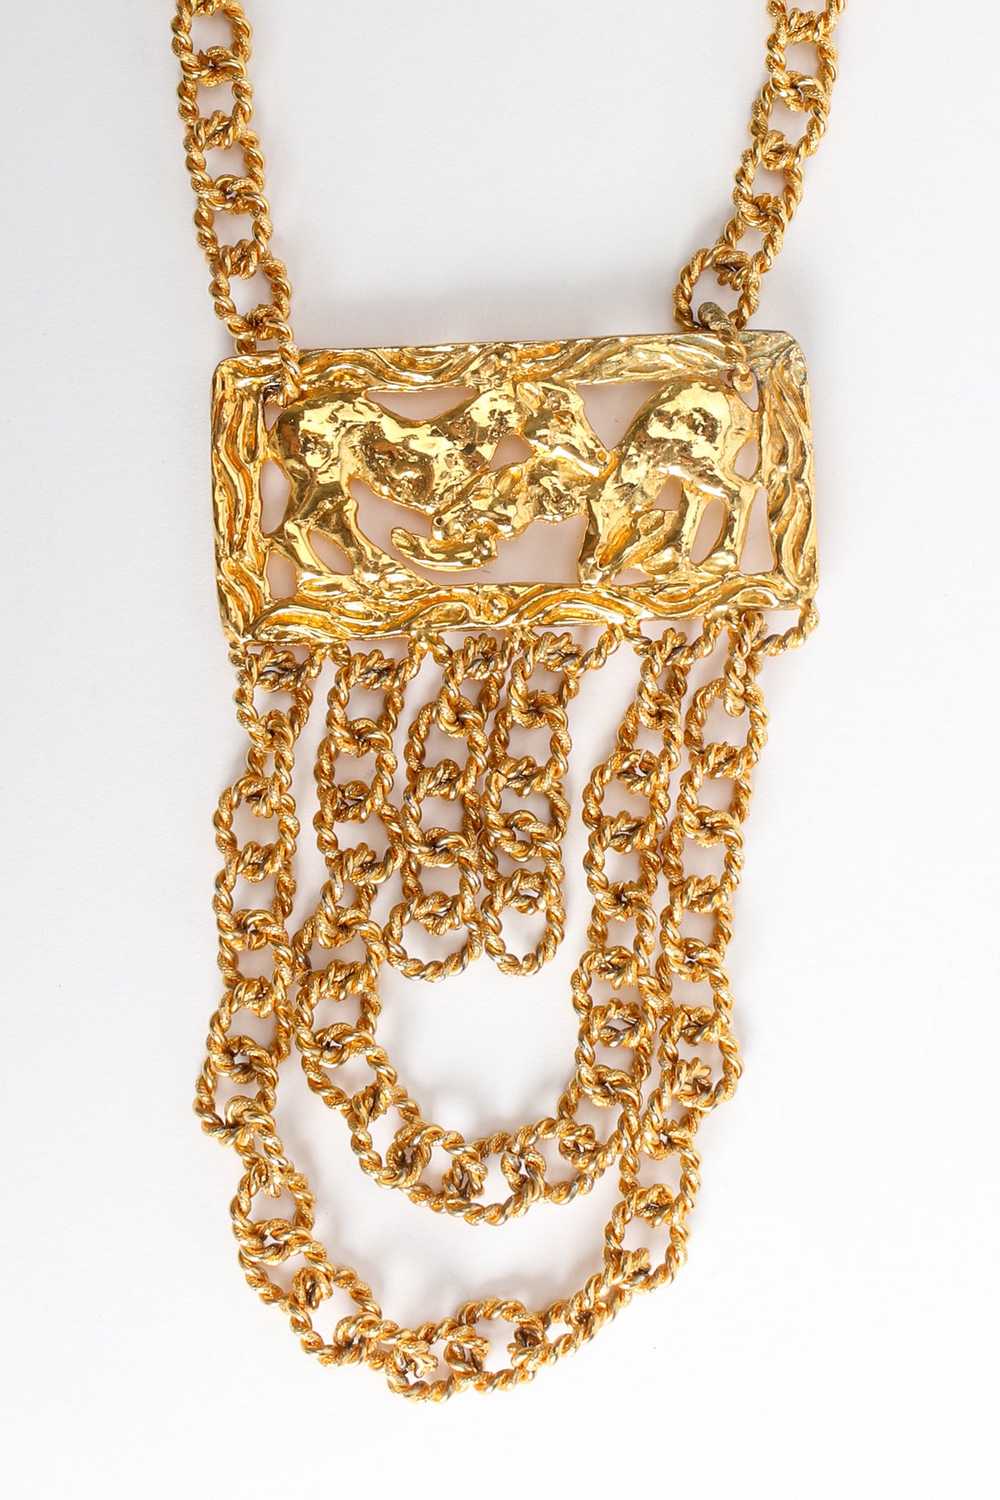 Golden Horse Pendant Rope Chain Necklace - image 4